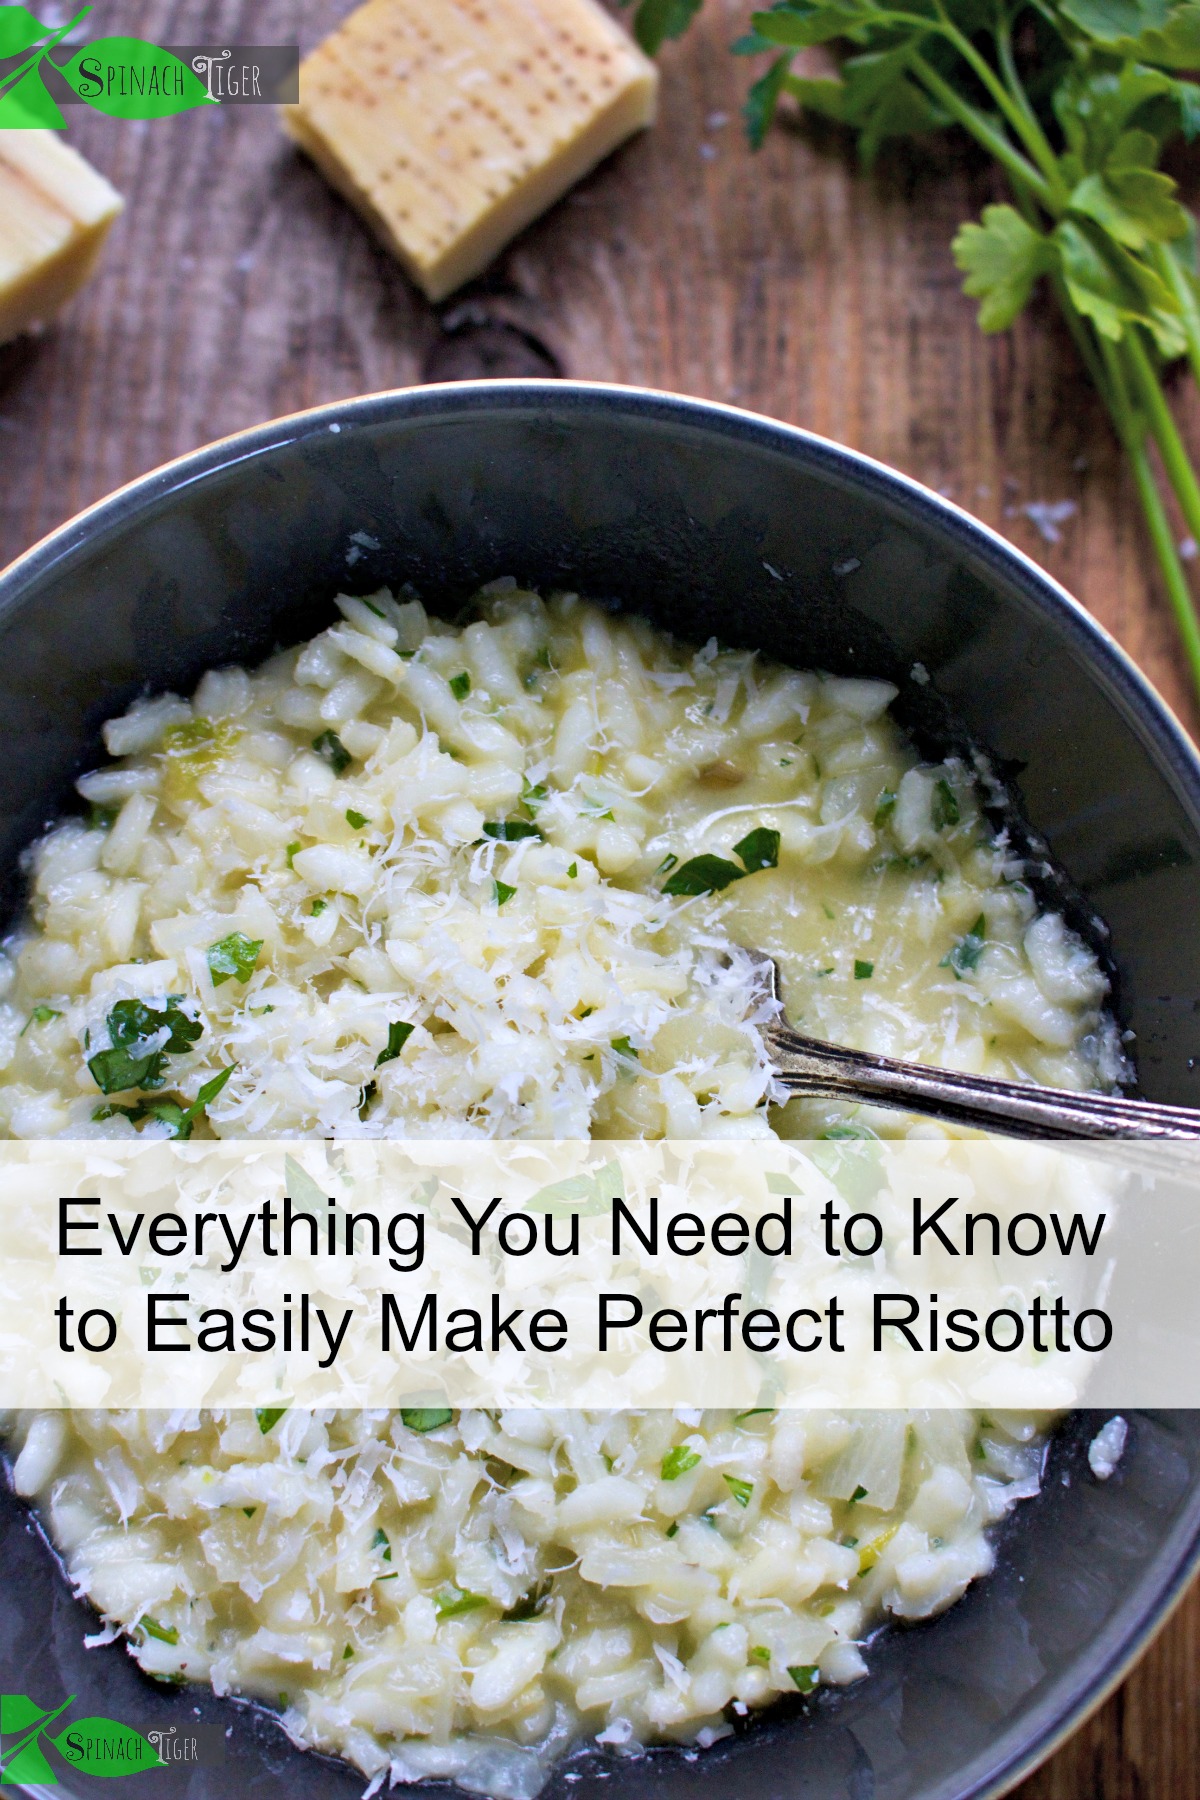 Everything you need to know and make perfect risotto with many tips and several risotto recipes from Spinach Tiger